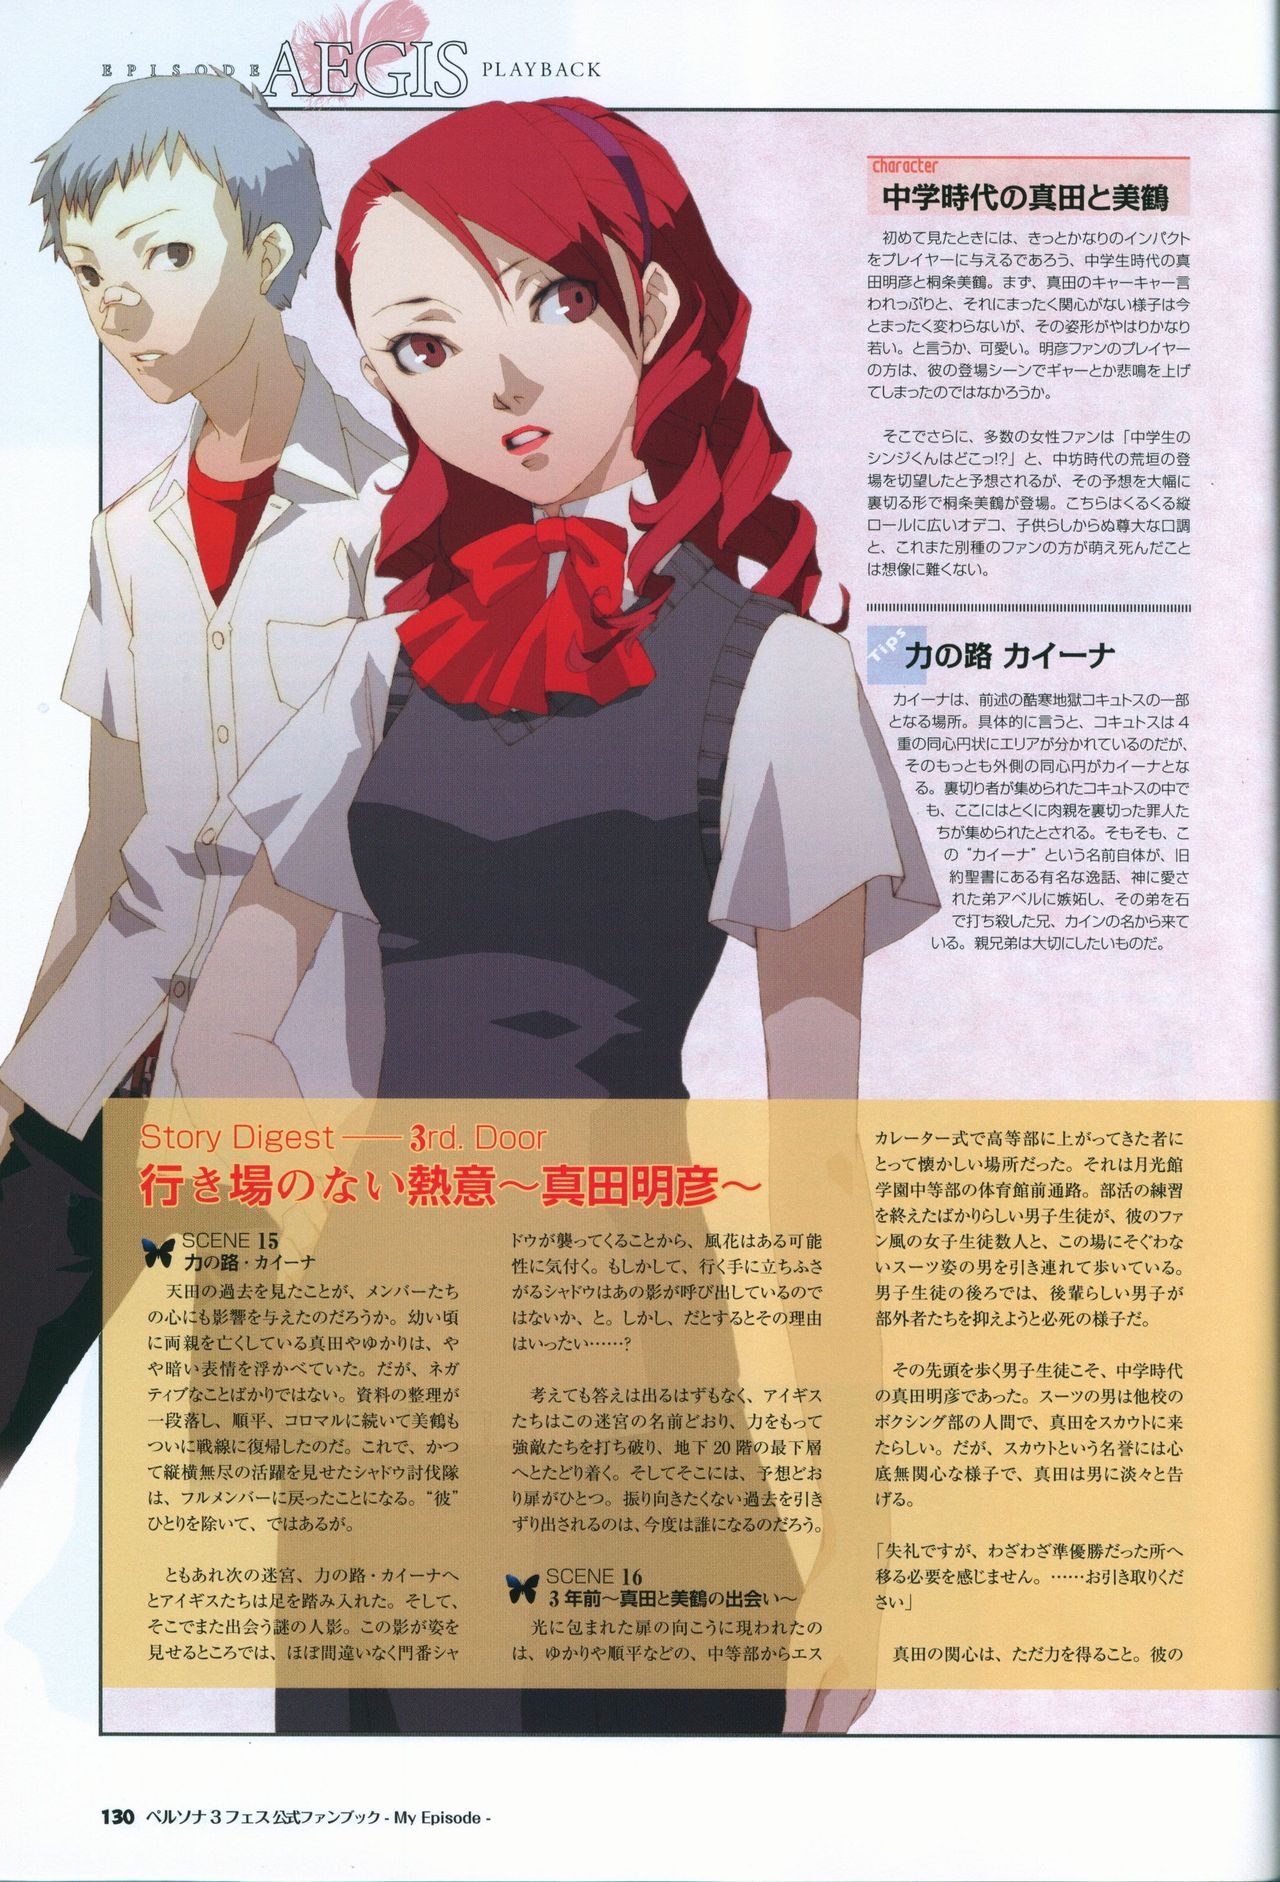 Persona 3 Fes Official Fan Book -My Episode- 131